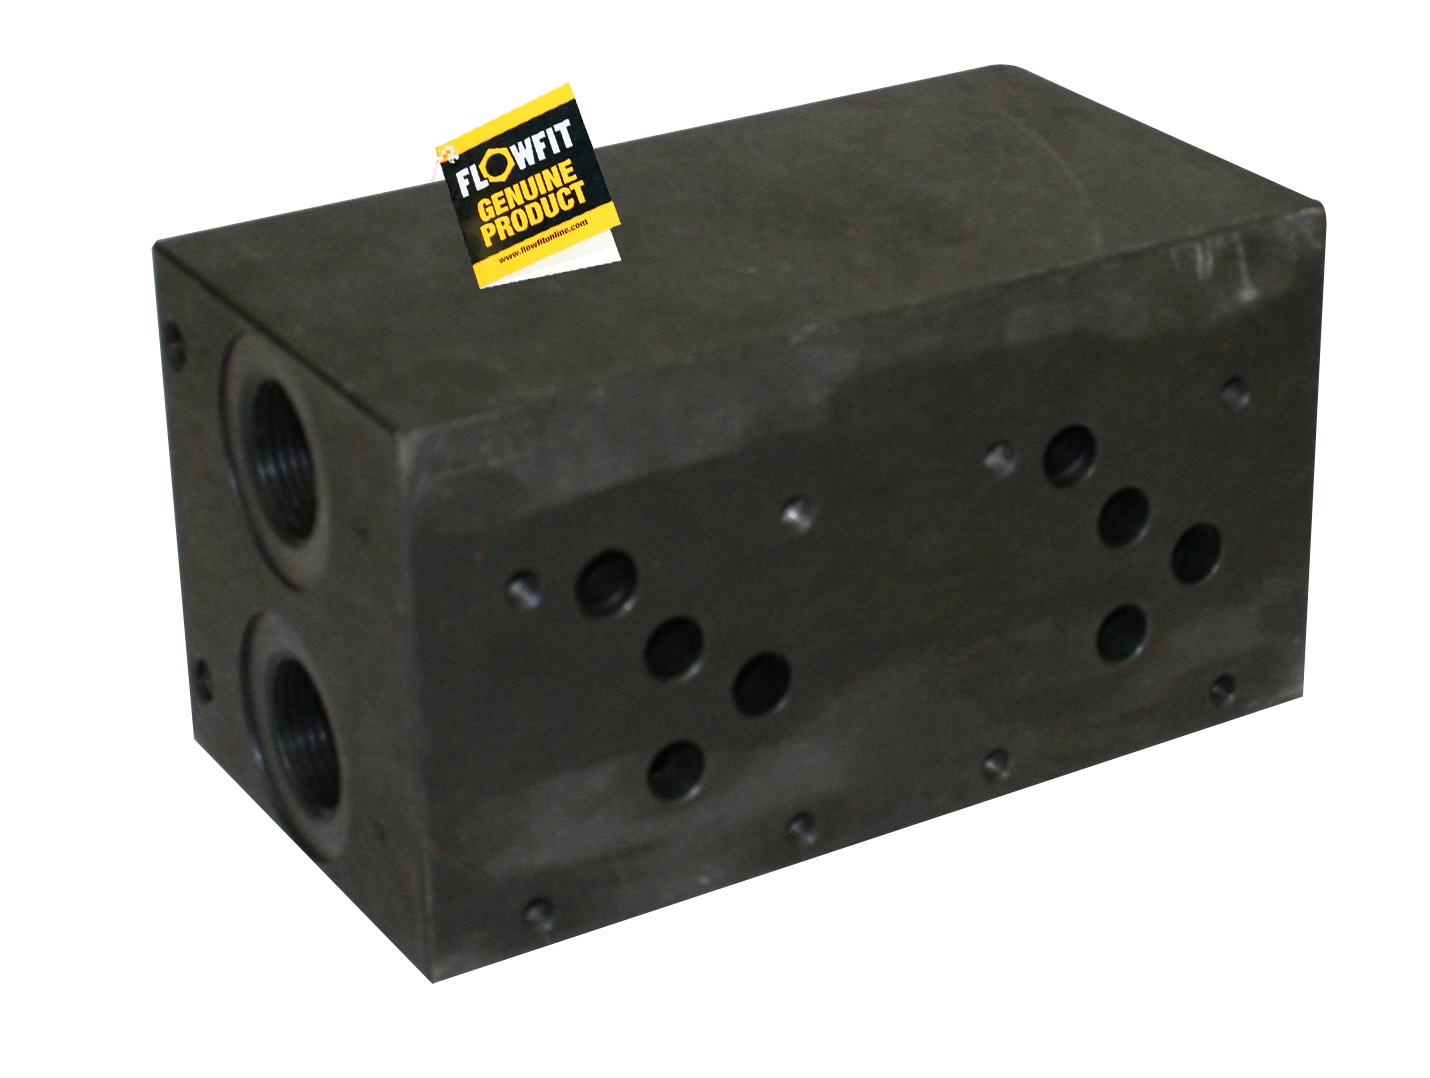 Flowfit hydraulic cetop 5 5 station steel manifold without relief valve cavity